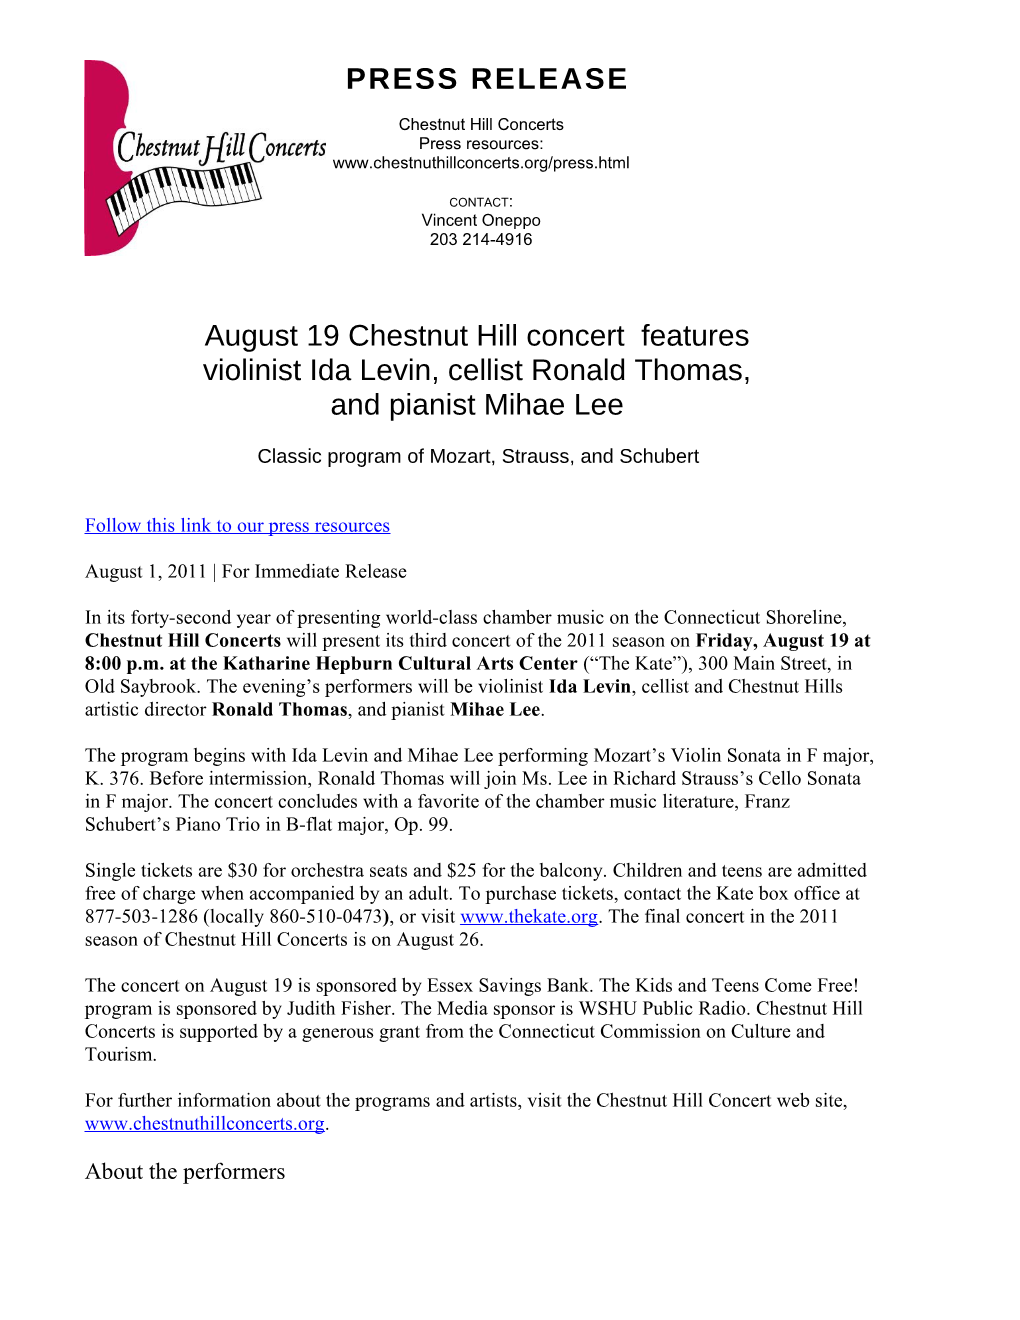 Chestnut Hill Concerts PRESS RELEASE Monday, August 1, 2011 PAGE 3